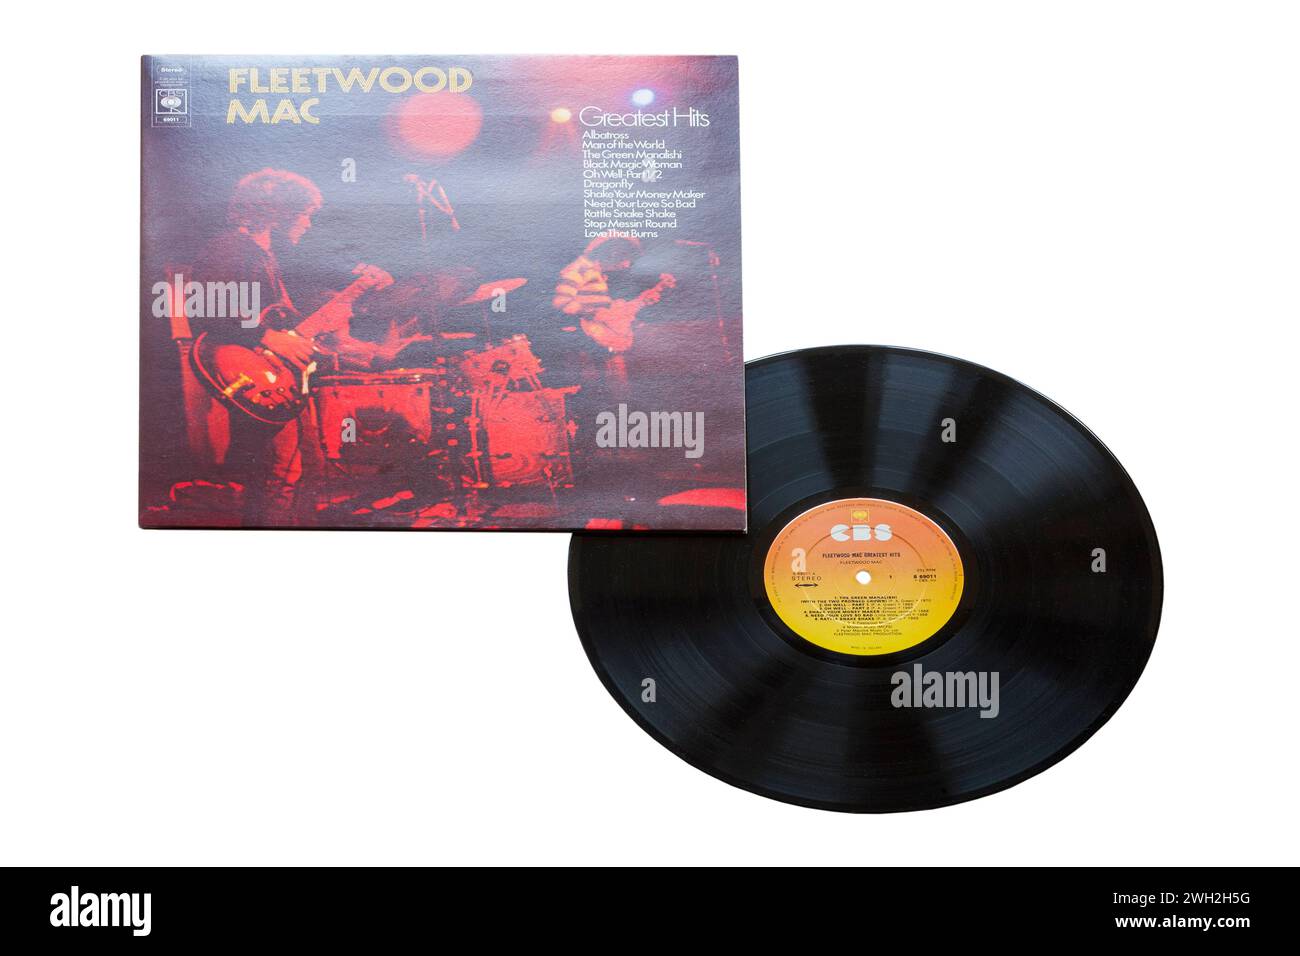 Fleetwood Mac Greatest Hits vinyl record album LP cover isolated on white background - 1971 Stock Photo